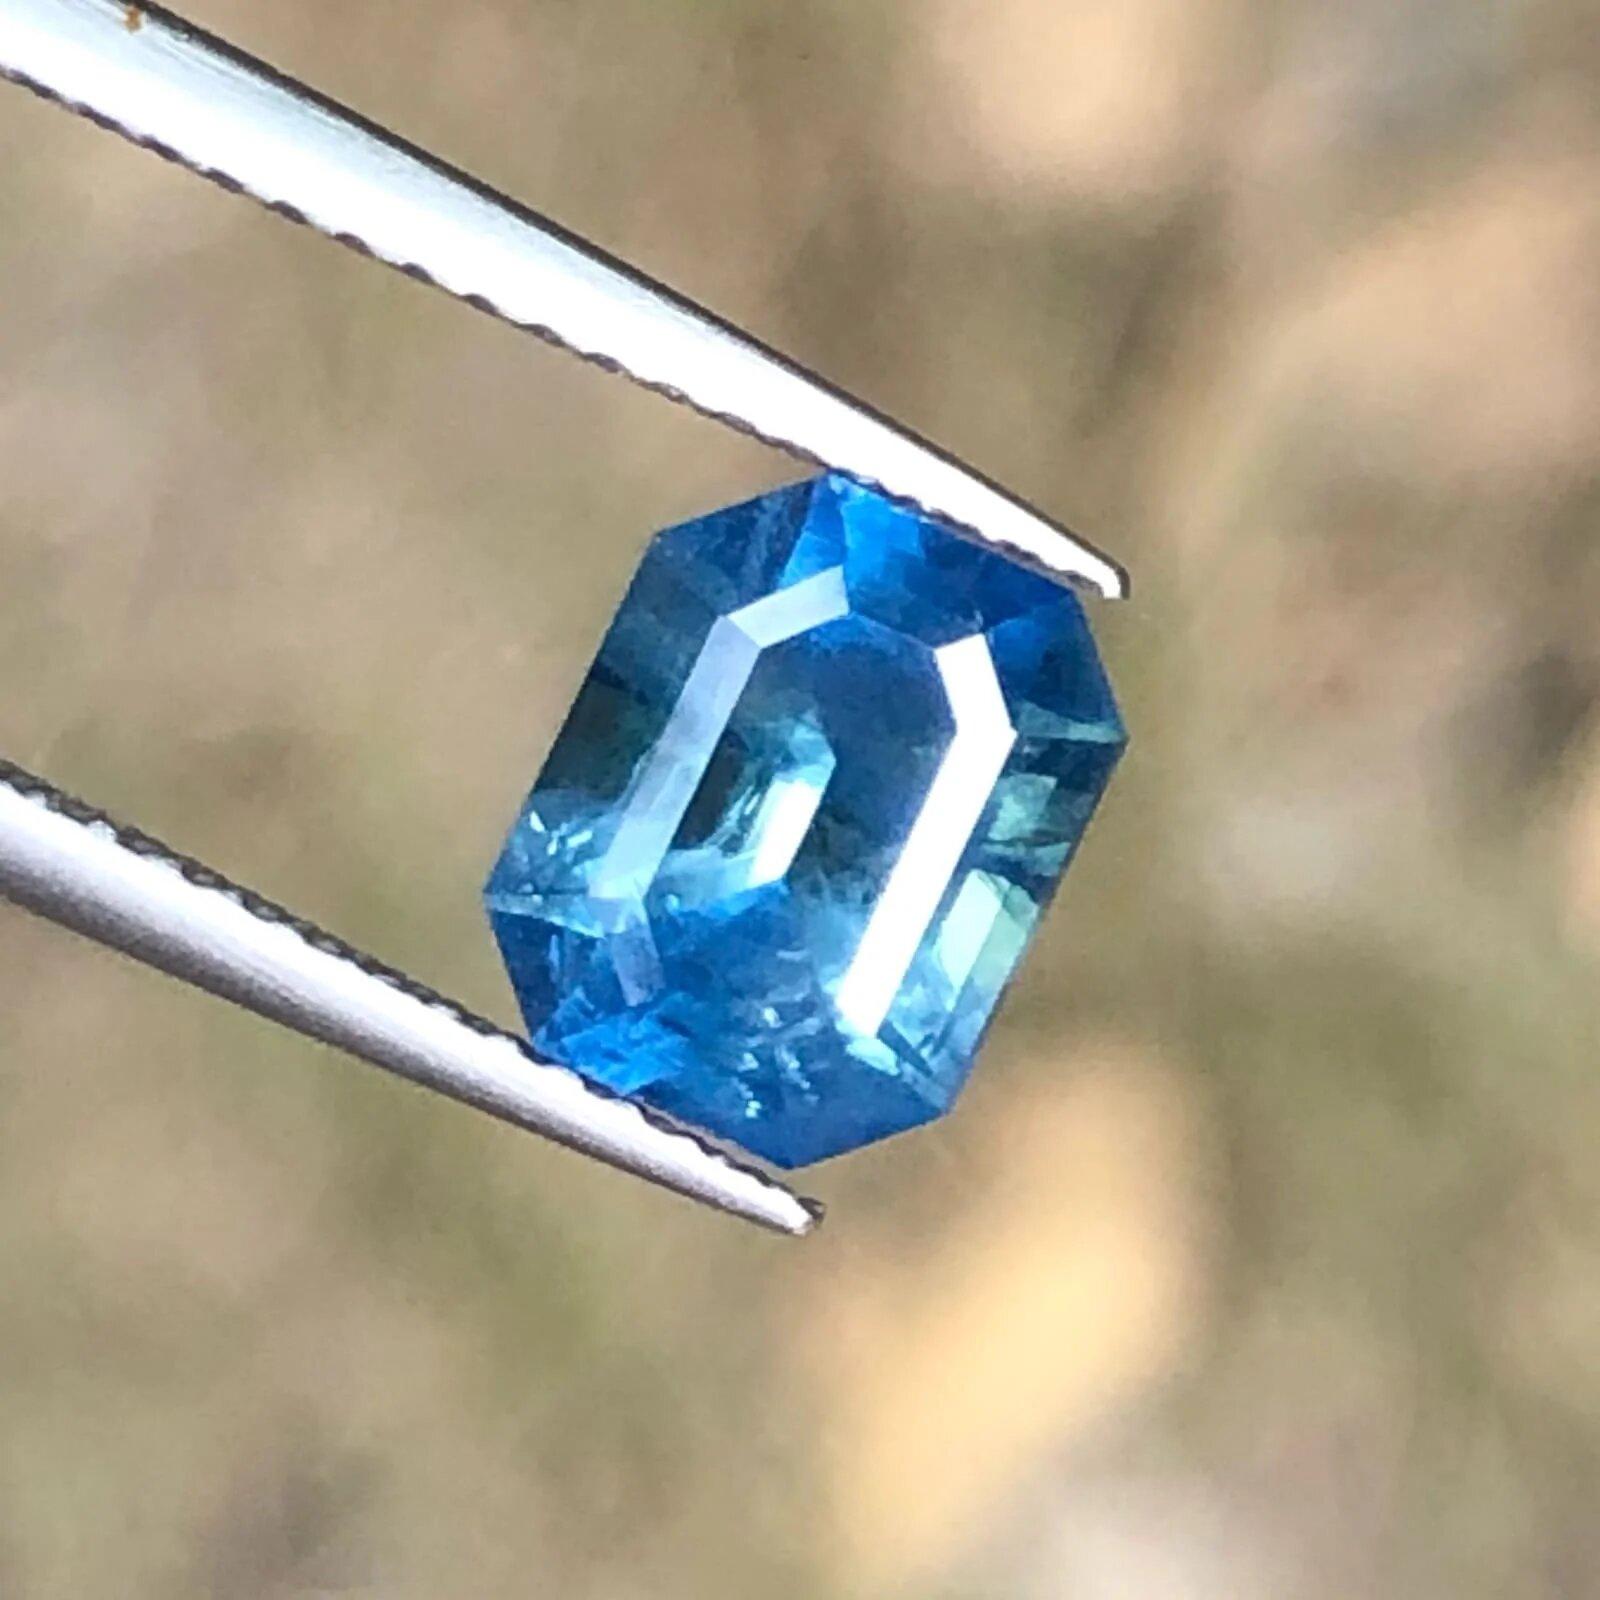 This 2.05 Carat Royal Emerald Cut Blue Sapphire was purchased from our Tanzanian Source in Thailand as a rough piece of gemstone. It was brought here keeping in mind that we will cut this piece with the help of our professional gem cutters in